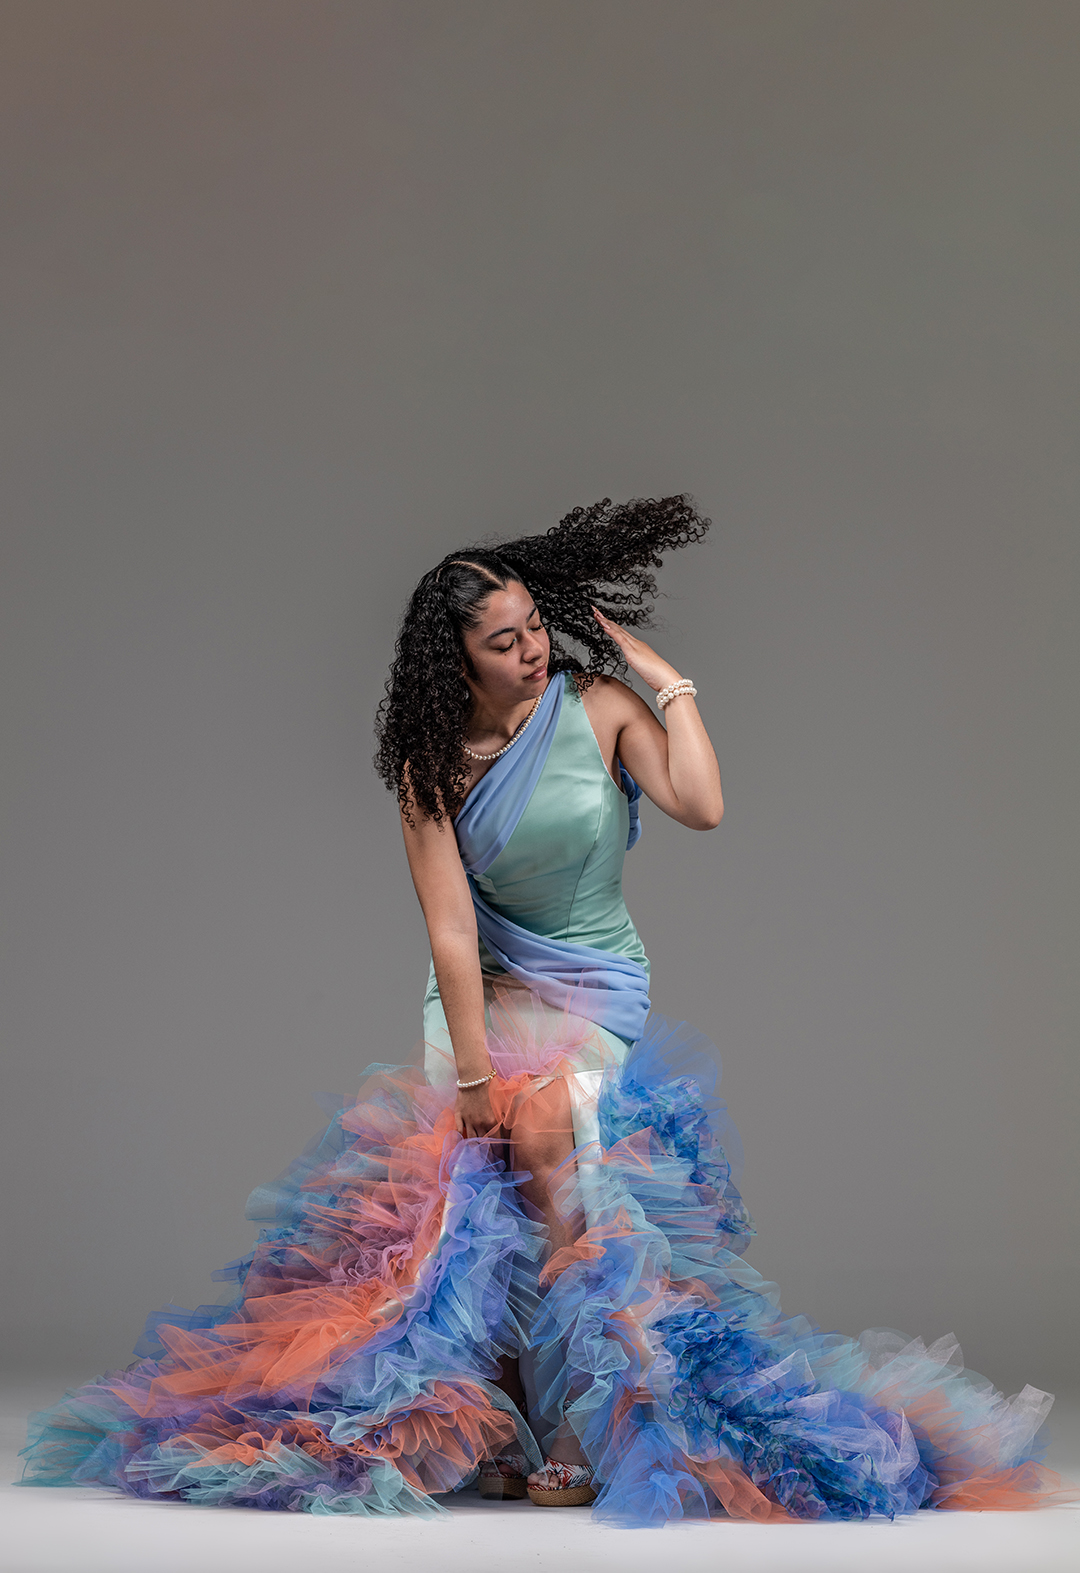 Front view of a model bending forward, wearing an asymmetric mermaid evening gown with tulle ruffles and a slit on the bottom. The model is flicking her hair back. The background is gray. 